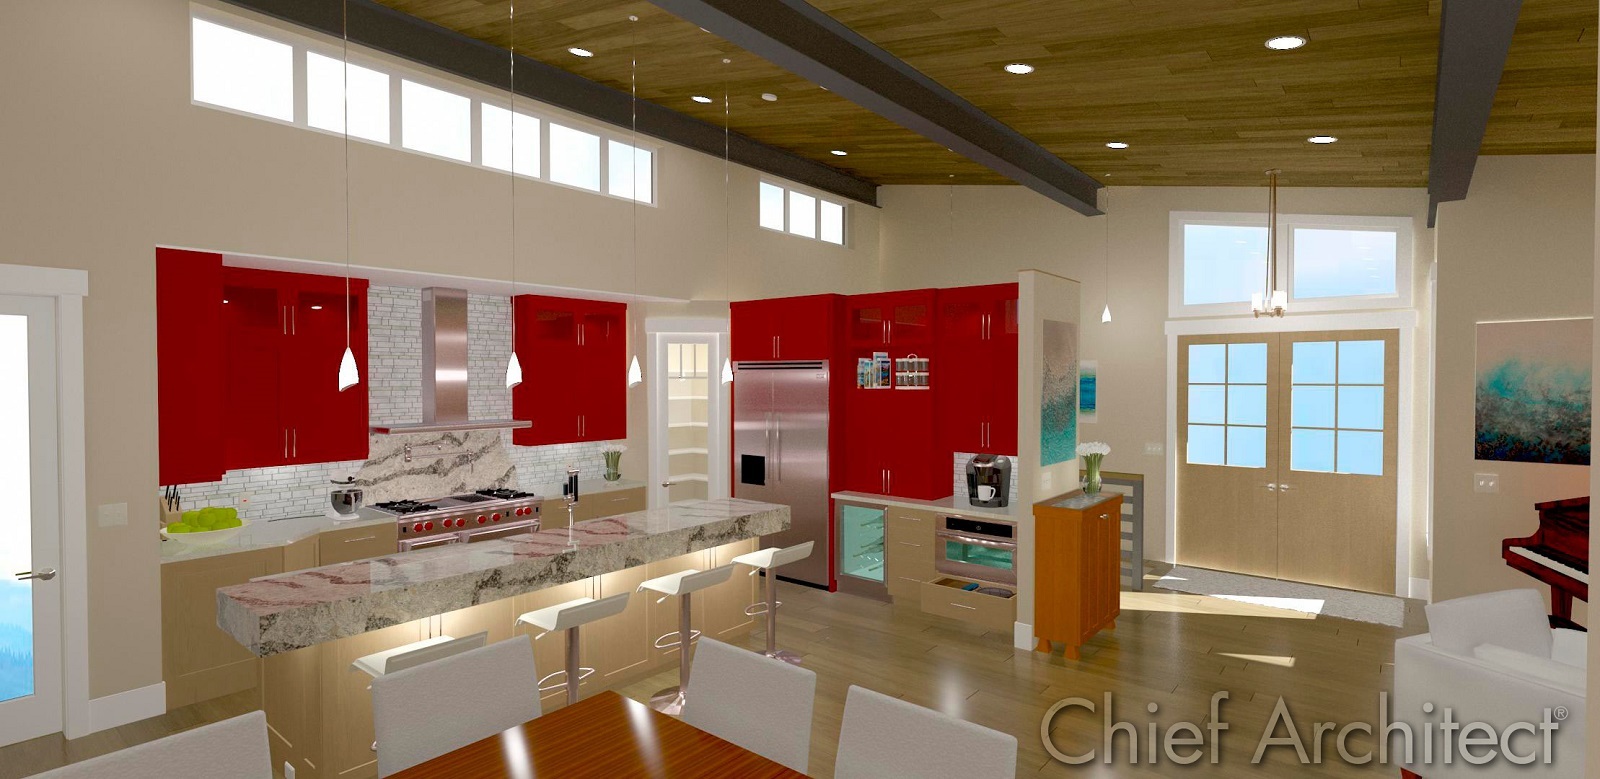 LakePoint-kitchen-red